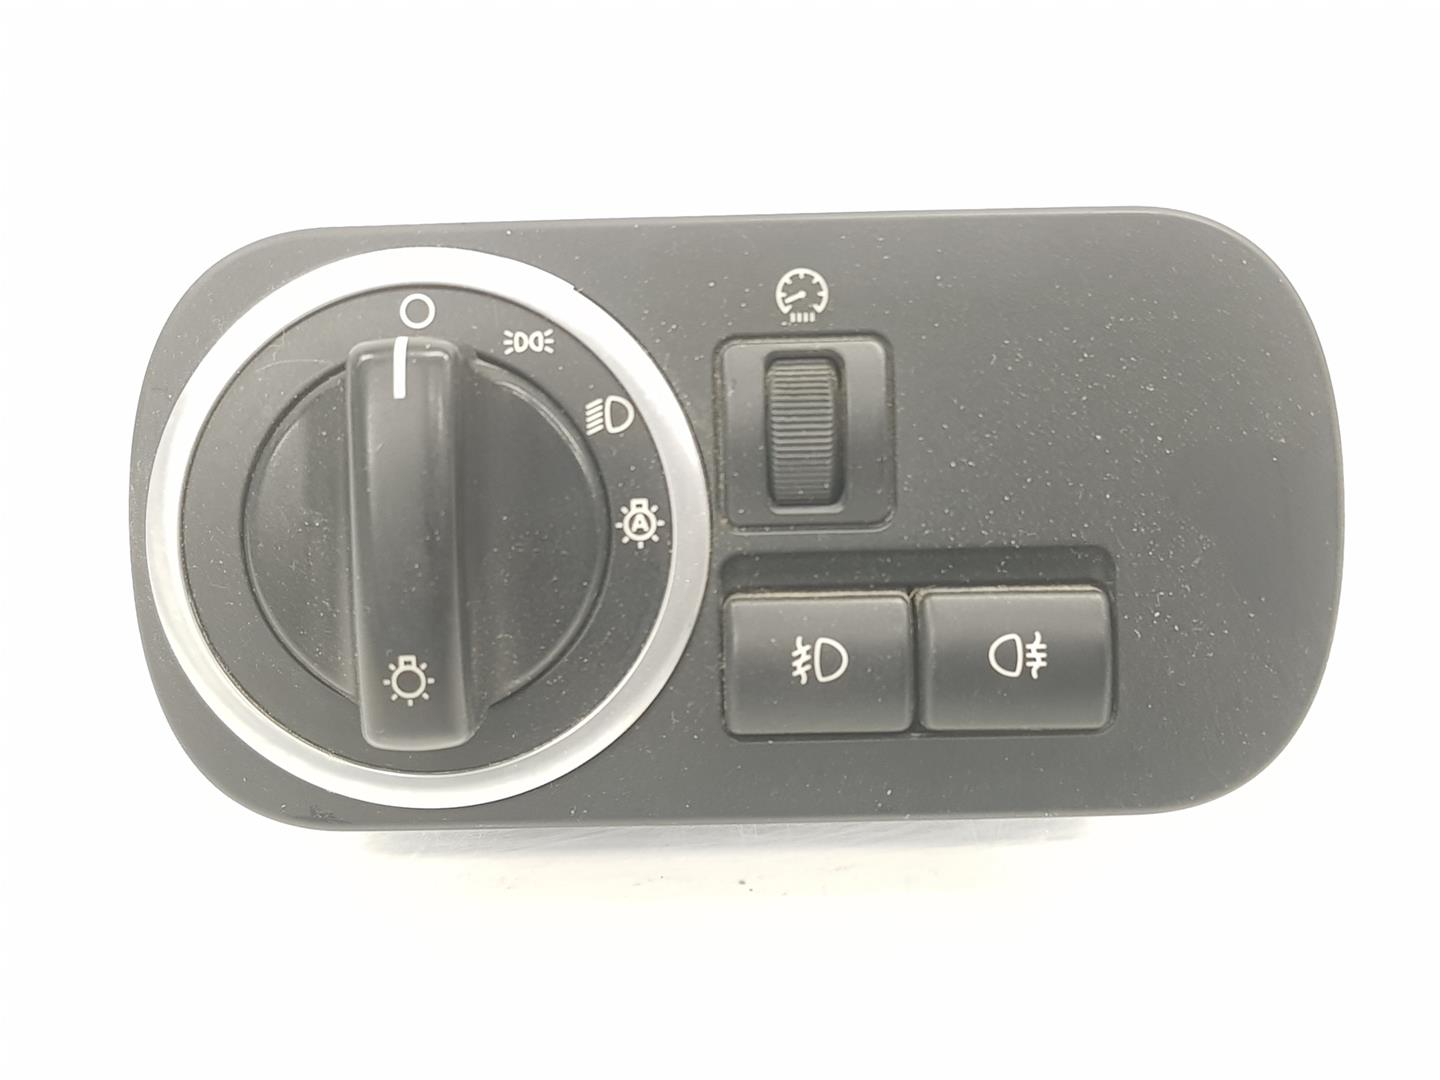 LAND ROVER Discovery 3 generation (2004-2009) Headlight Switch Control Unit LR010876, AH2213A024AC 24214822